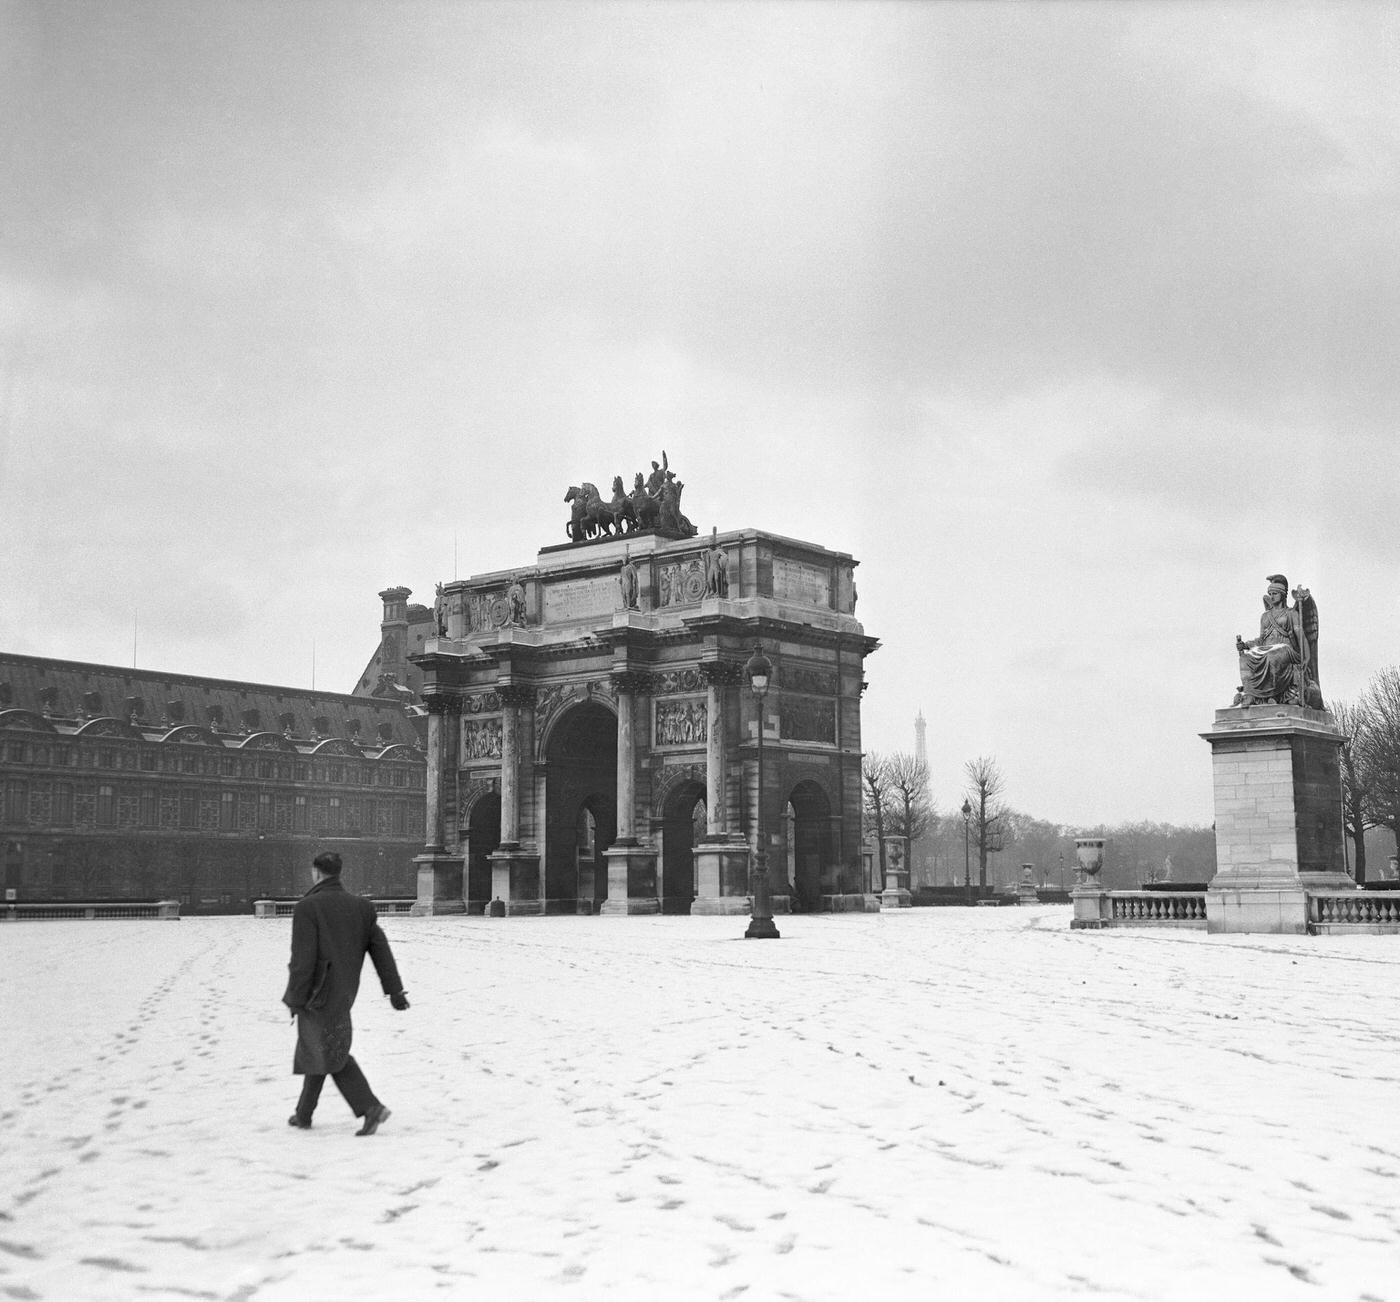 Snow Covering The Garden Of Tuileries And The Carrousel Arch Of Triumph, Paris, February 1956.